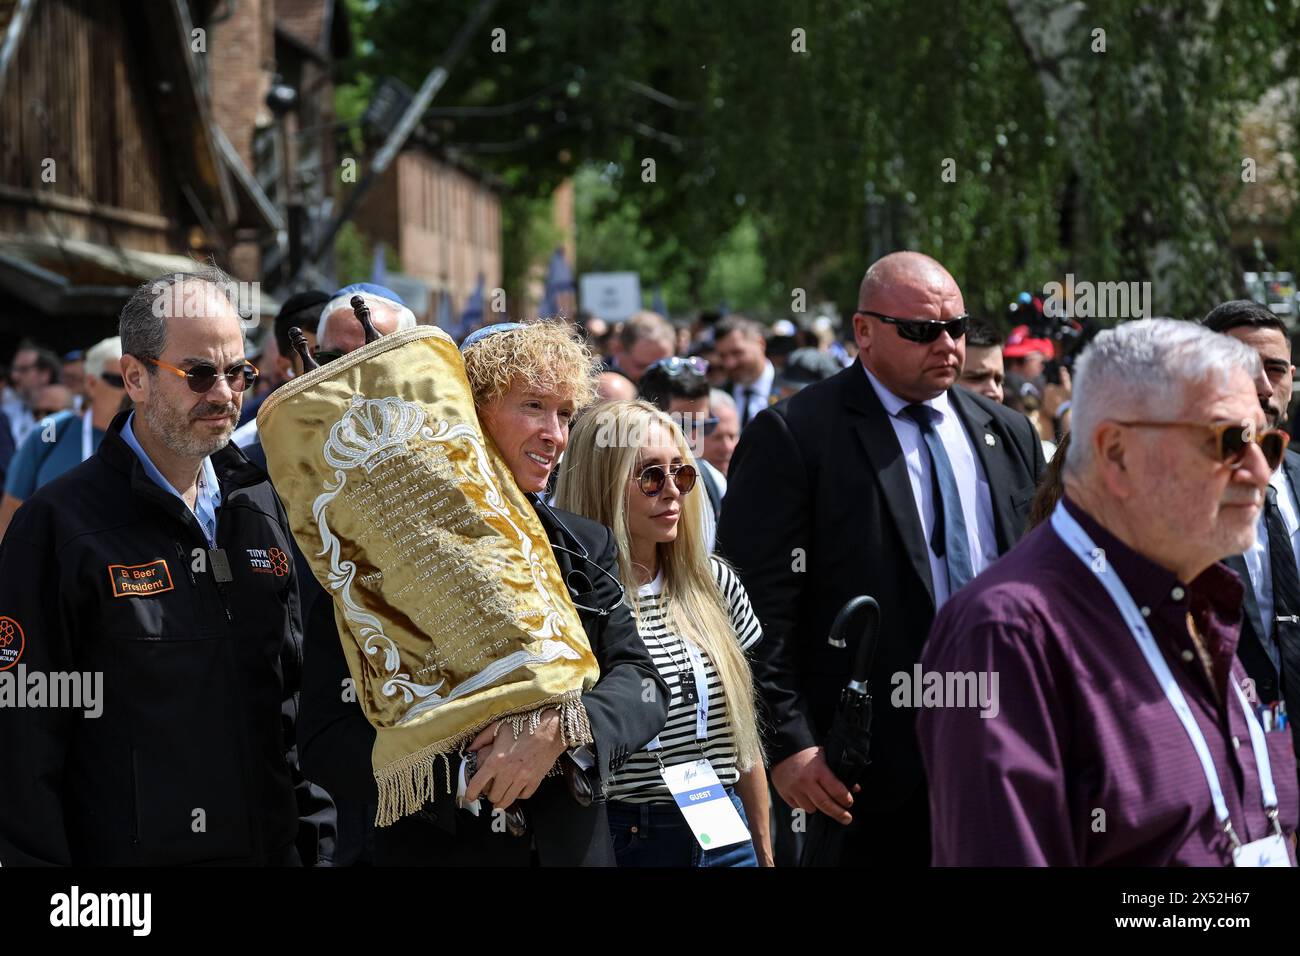 Oswiecim, Poland, May 6, 2024. Participants walk in the March of the Living 2024 at Auschwitz Camp gate 'Work Makes you Free', with 55 holocaust survivors participating. Holocaust survivors, and October 7th survivors attend the March of the Living together with a delegation from, among others, the United States, Canada, Italy, United Kingdom. On Holocaust Memorial Day observed in the Jewish calendar (Yom HaShoah), thousands of participants march silently from Auschwitz to Birkenau. The march has an educational and remembrance purpose. This year March was highly politicized due to the Israeli w Stock Photo